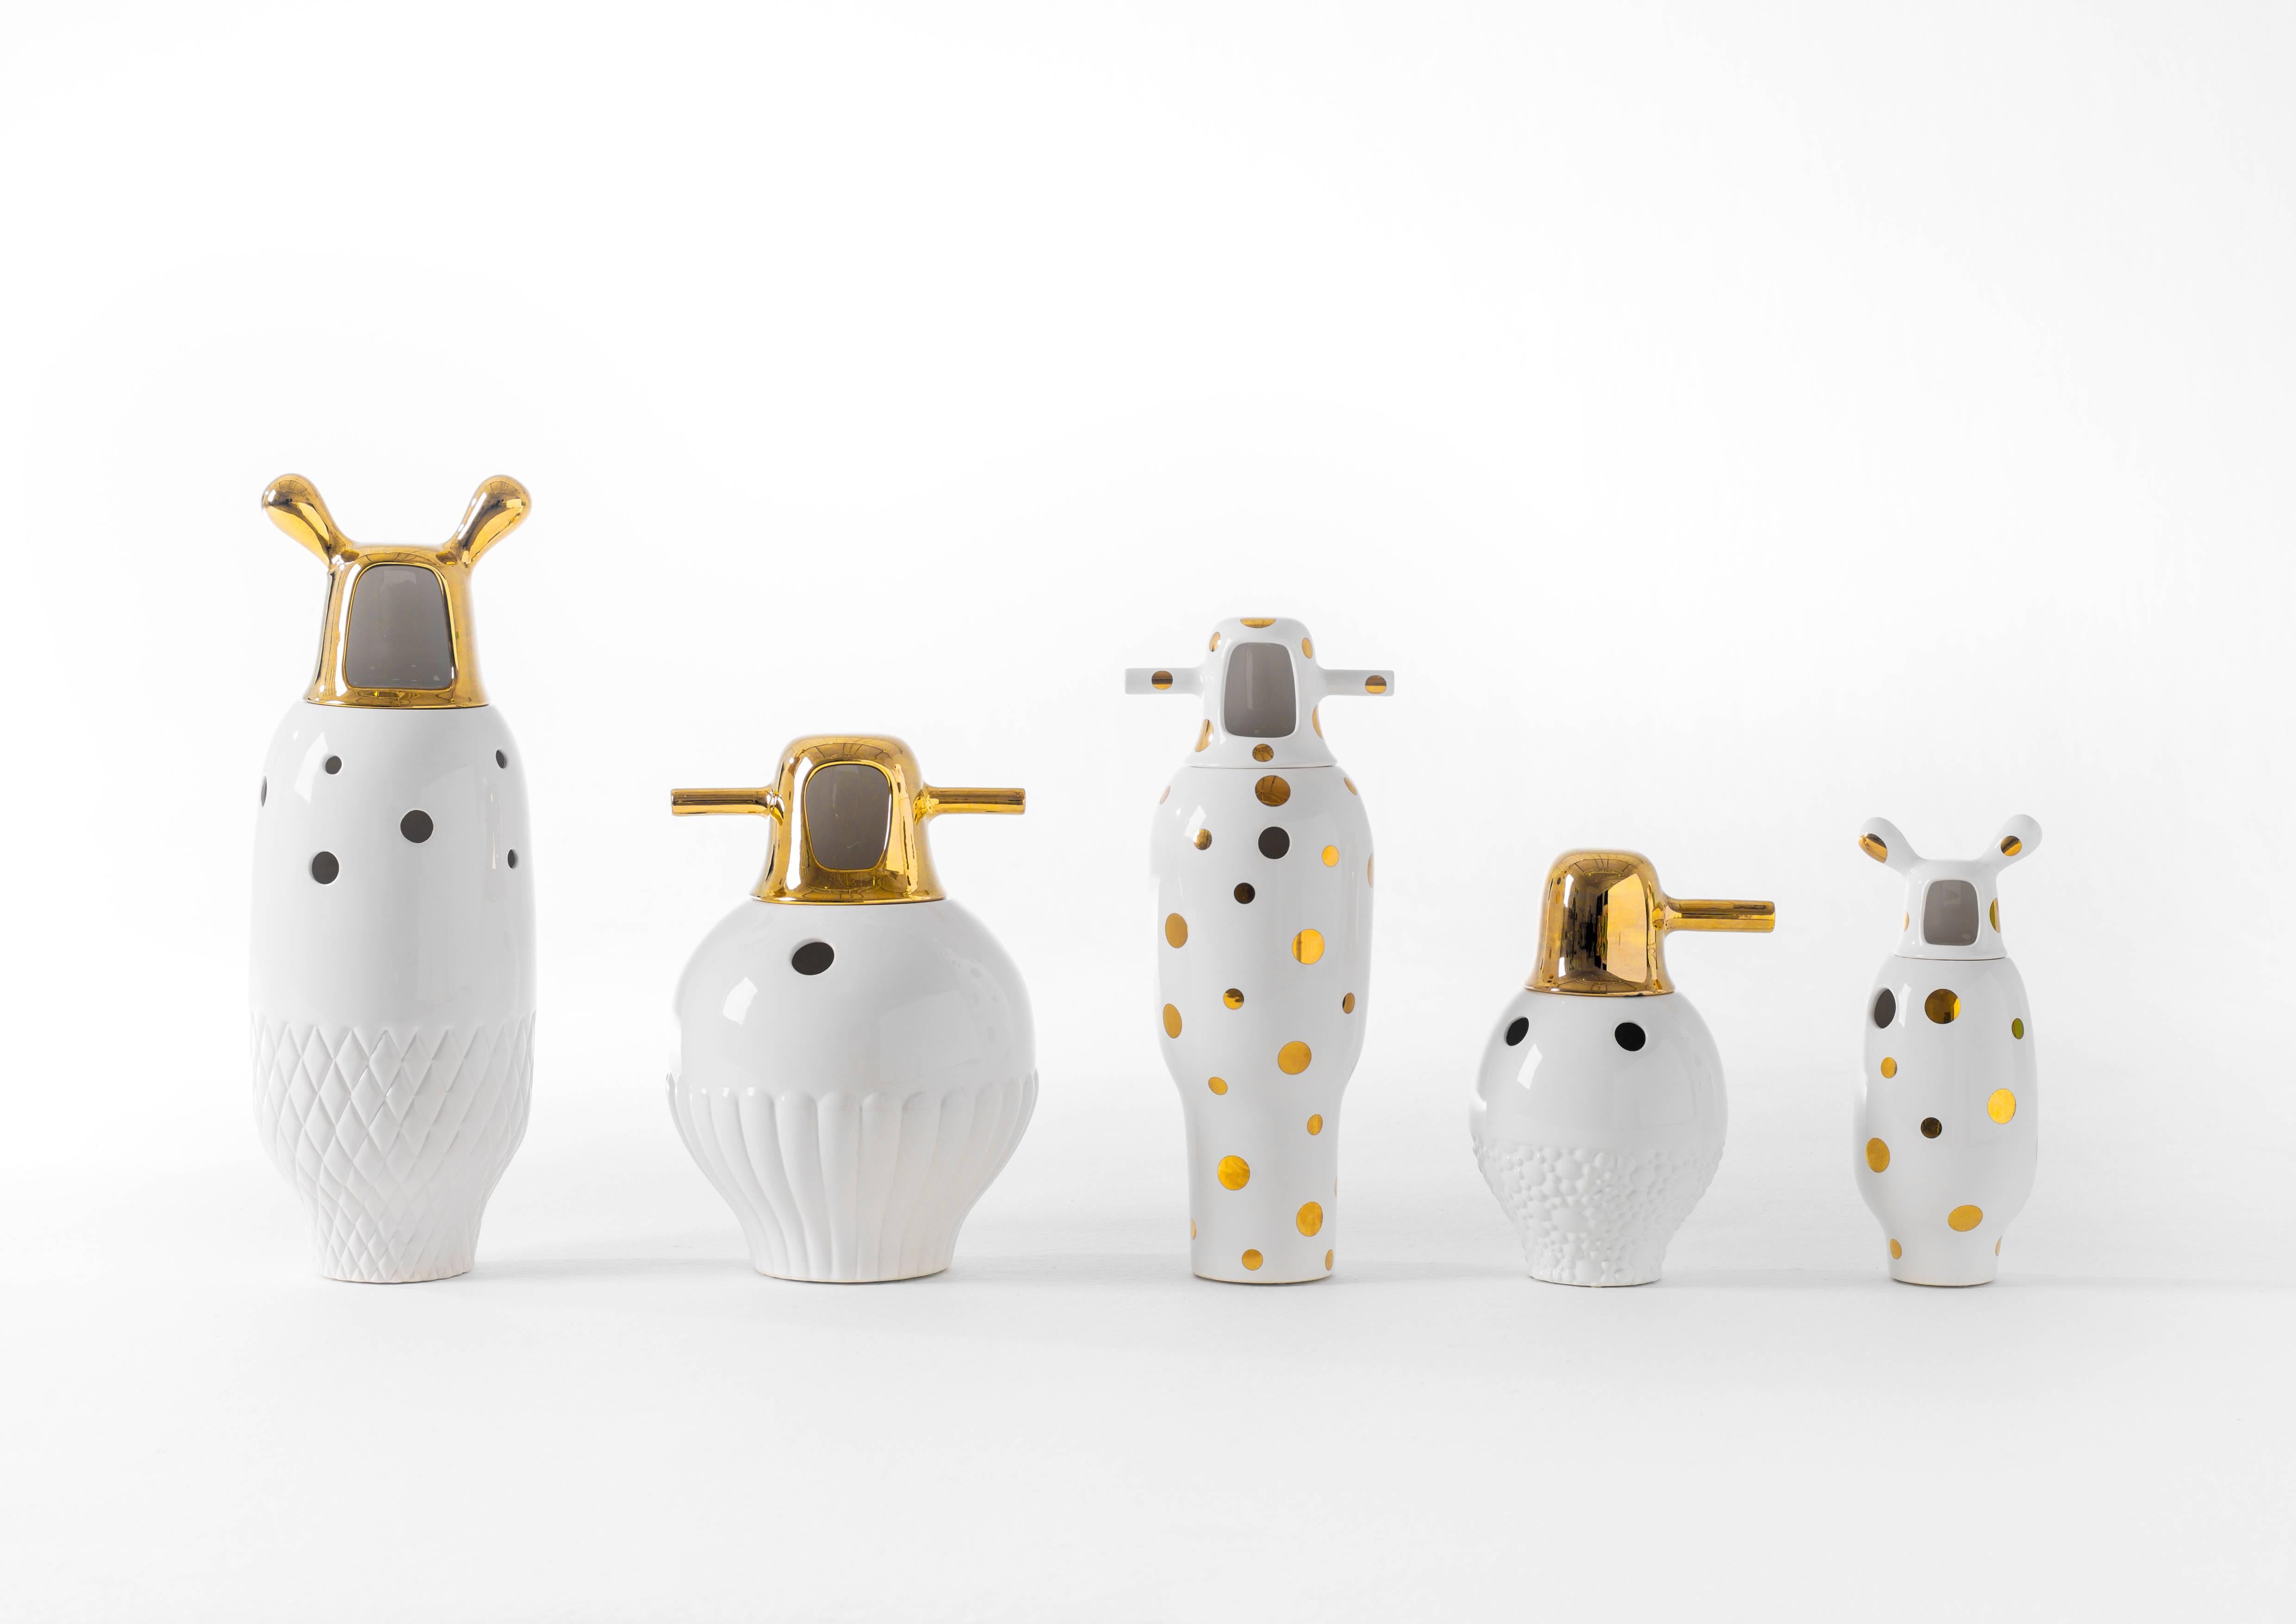 The Showtime vases by Jaime Hayon are the most iconic in BD’s catalogue. After completing 10 years, the vases have a new white enamel finish with decorations in 24 carat gold. Talent can be found in these little sculptures just the same as can be